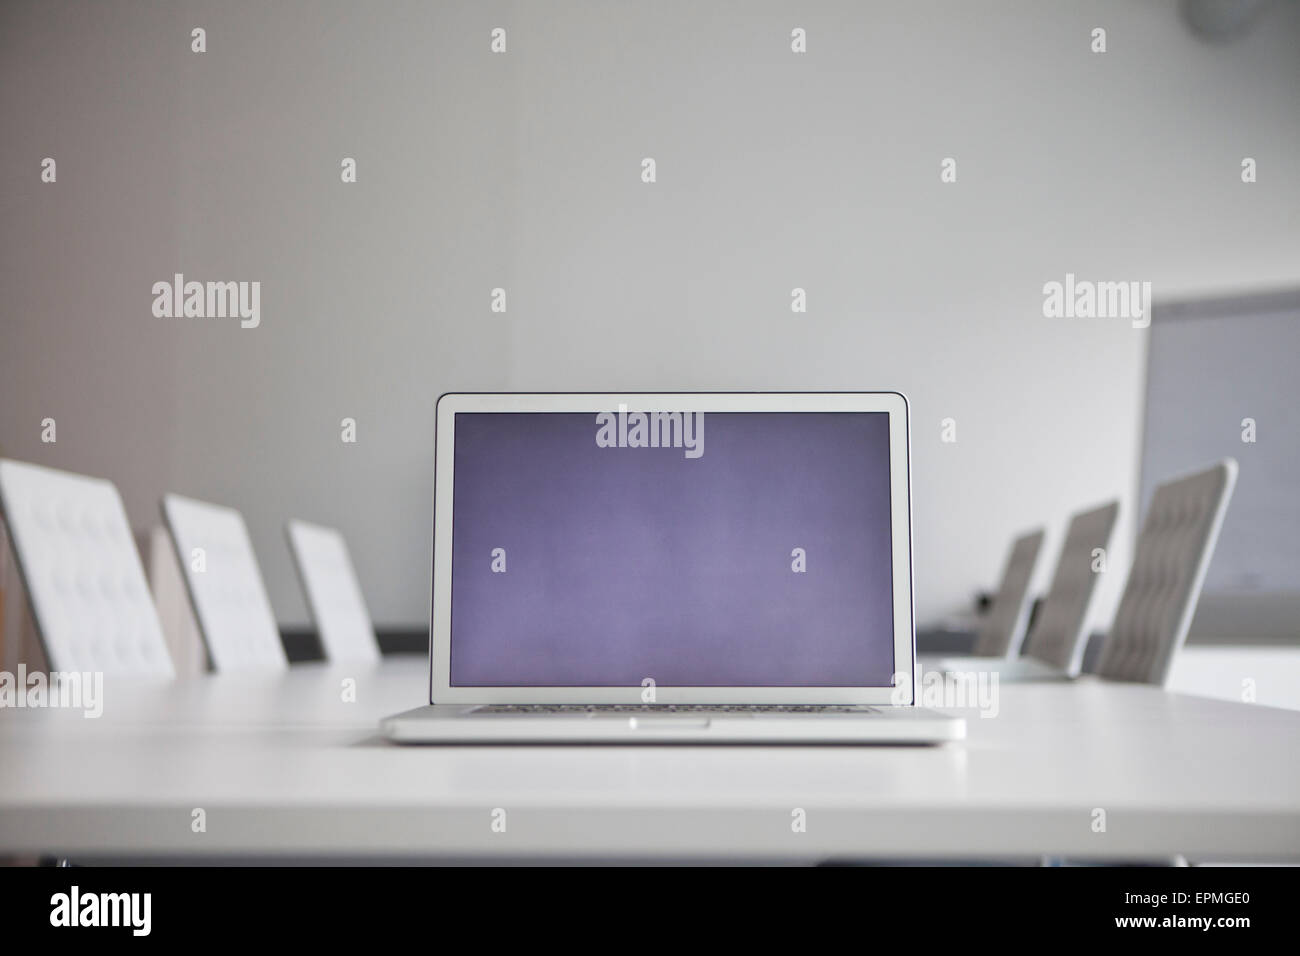 Opened laptop standing on conference table Stock Photo